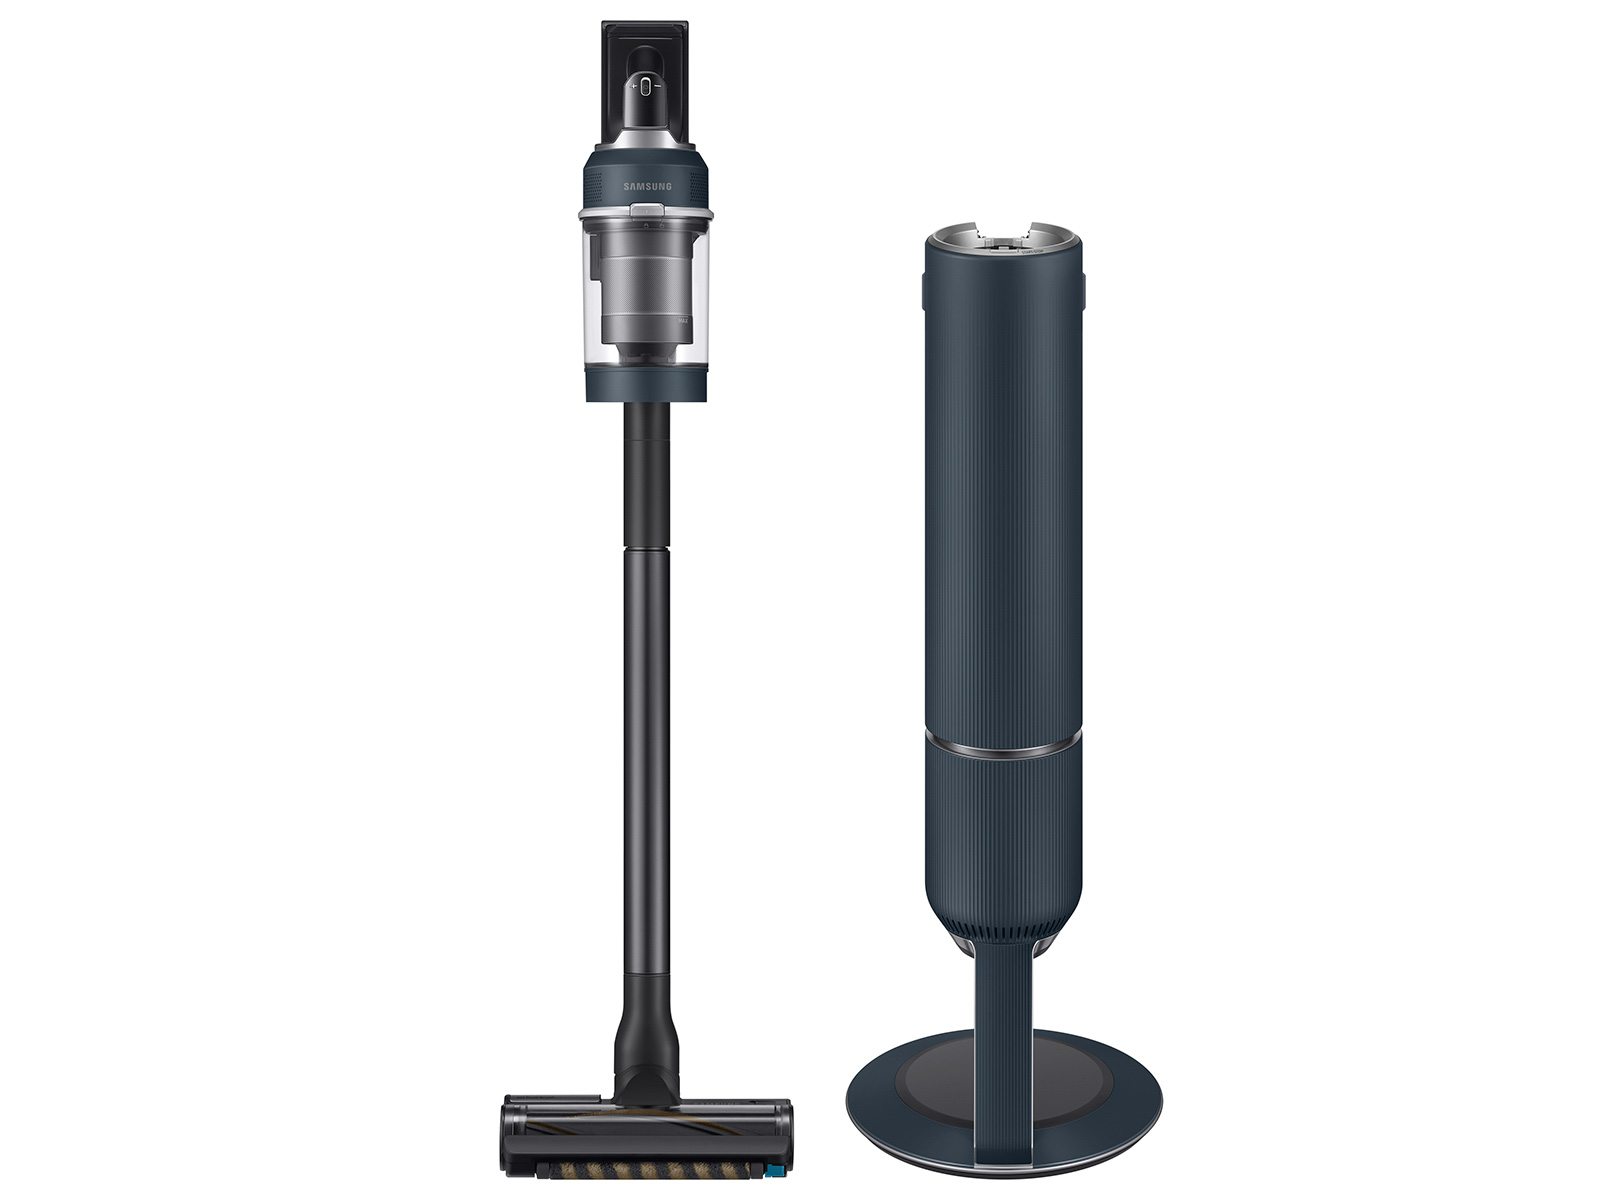 Samsung EPP (YMMV) Bespoke Jet Cordless Stick Vacuum with All-in-One Clean Station in Midnight Blue + Free extra battery $323.74